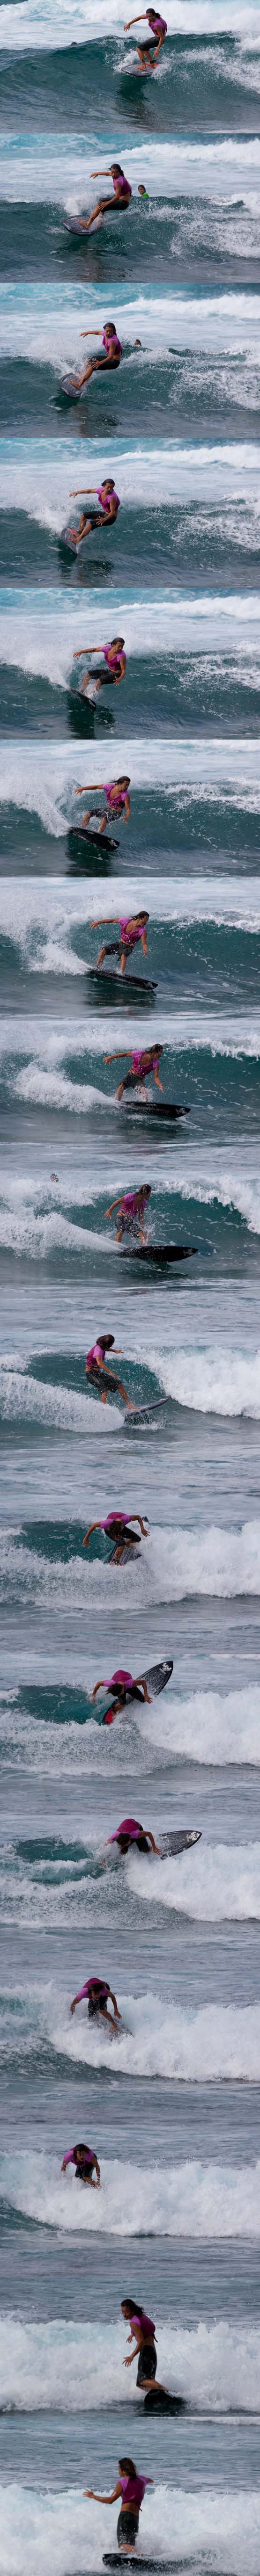 2010_NH_Surfing_SQ_T8869